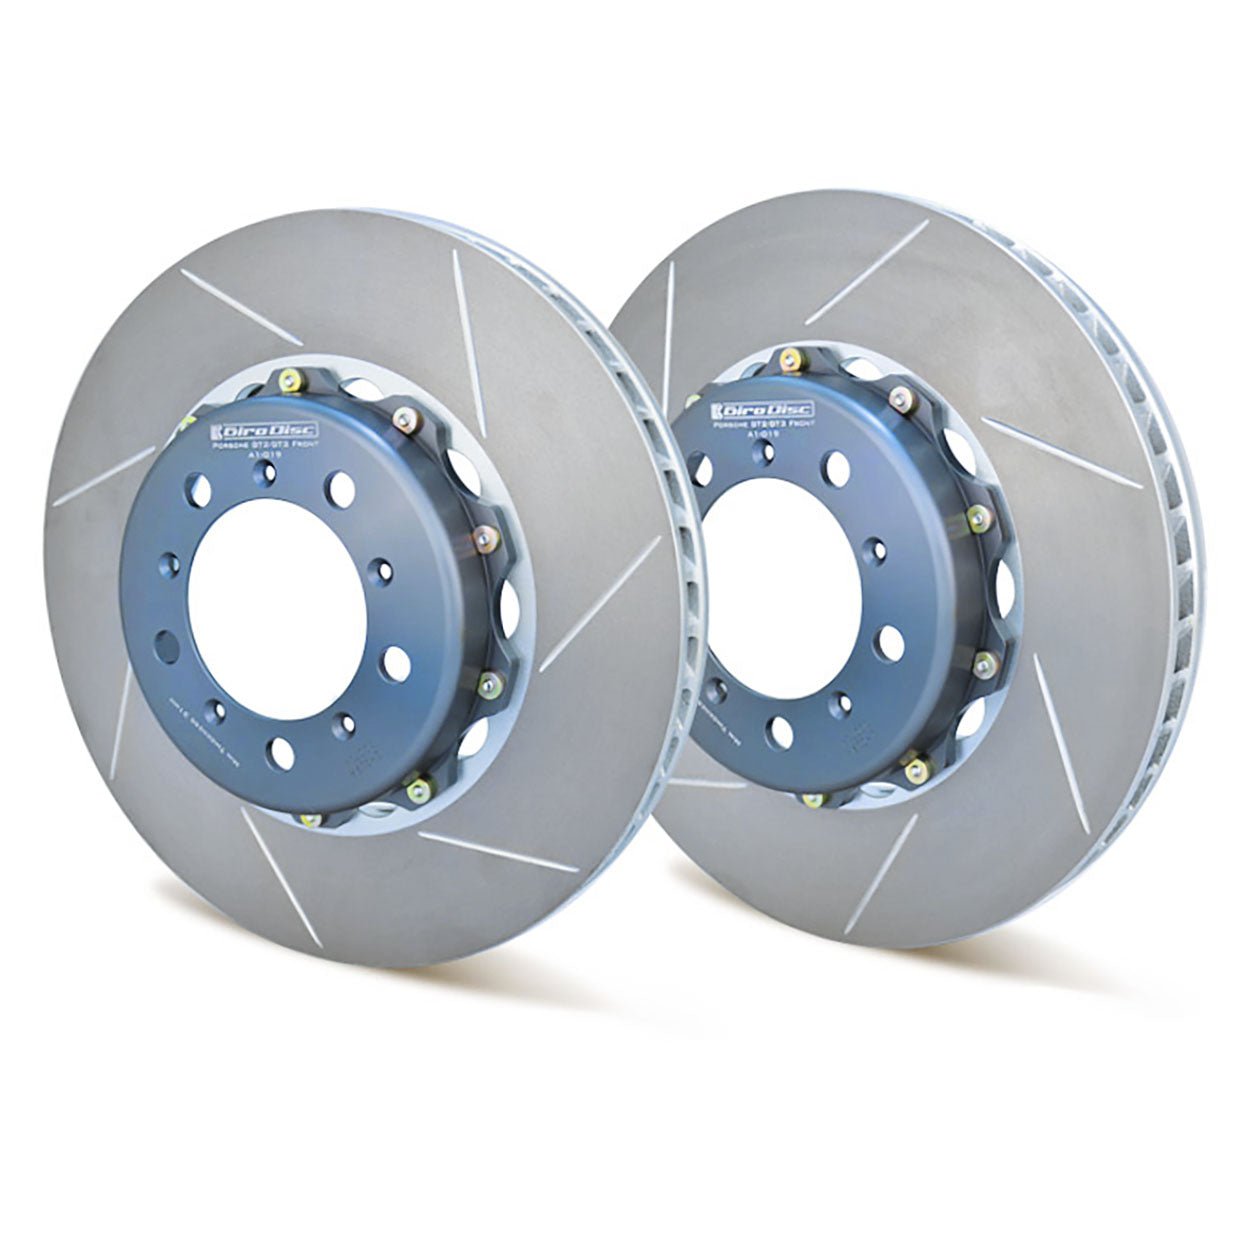 A1-019 Girodisc 2pc Front Brake Rotors (350mm) - Competition Motorsport